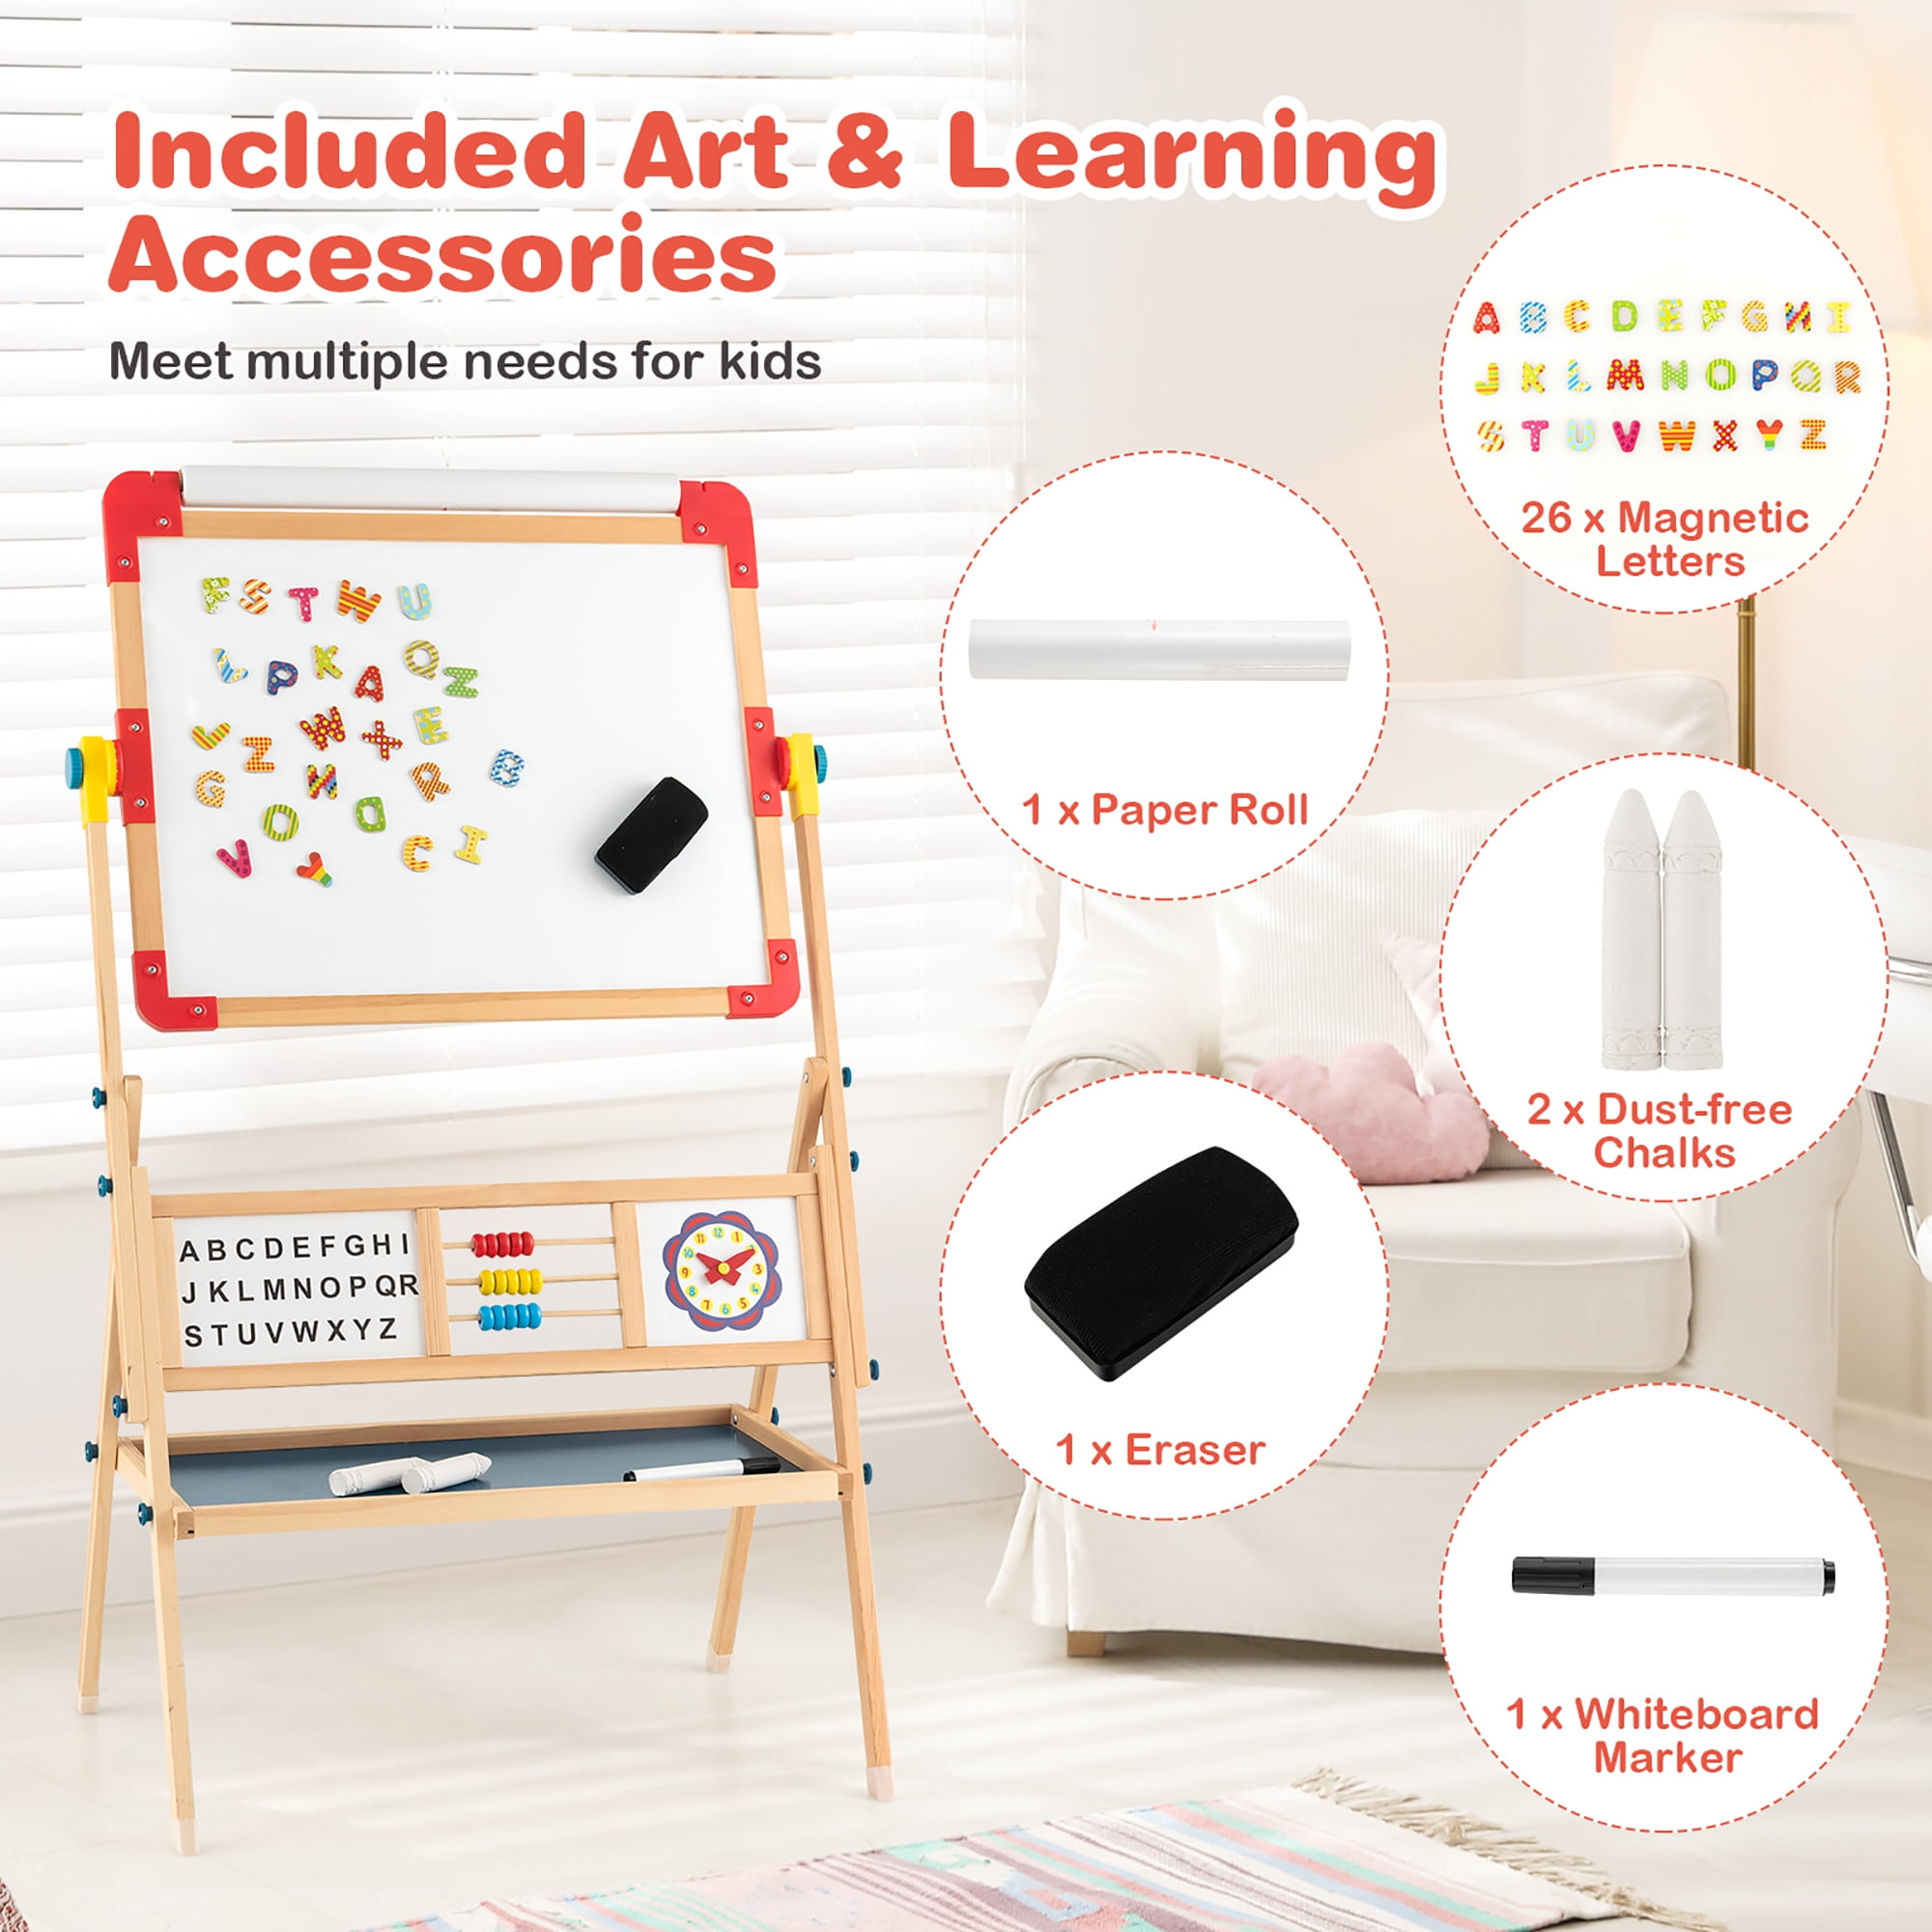 $89 All-in-One Wooden Art Easel + Second Paper Roll, Just $34.73